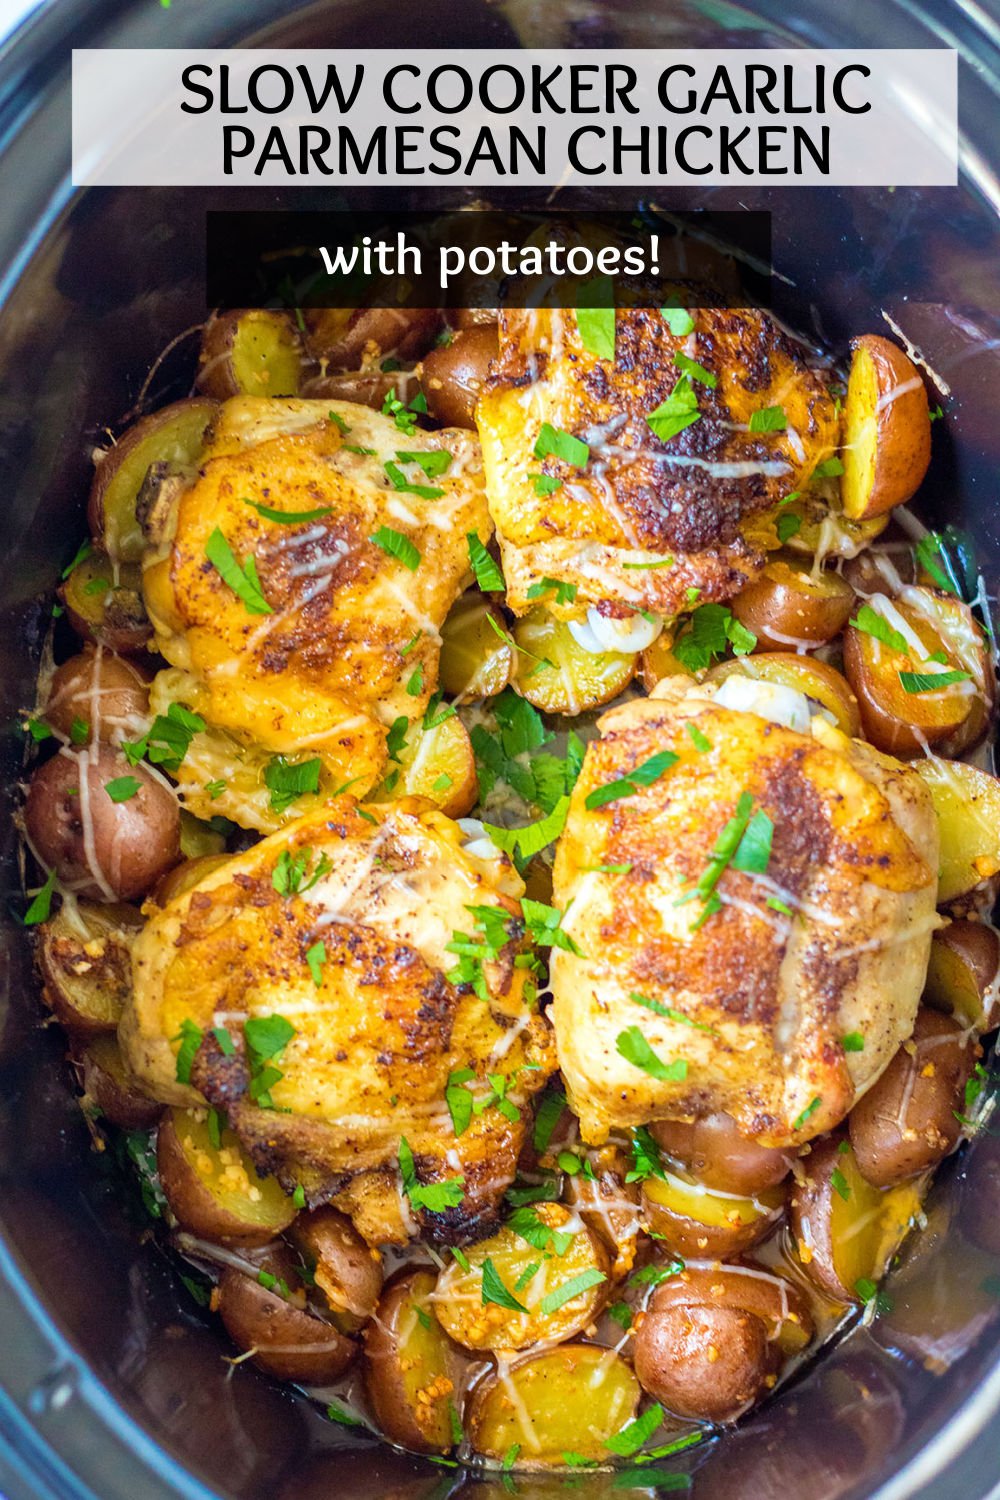 Slow Cooker Garlic Parmesan Chicken is a super easy, super comforting, super flavorful dinner! Because it's made in the crockpot, there is very little hands-on time. Let the slow cooker do the work and cook your meat and potatoes at the same time. | www.persnicketyplates.com